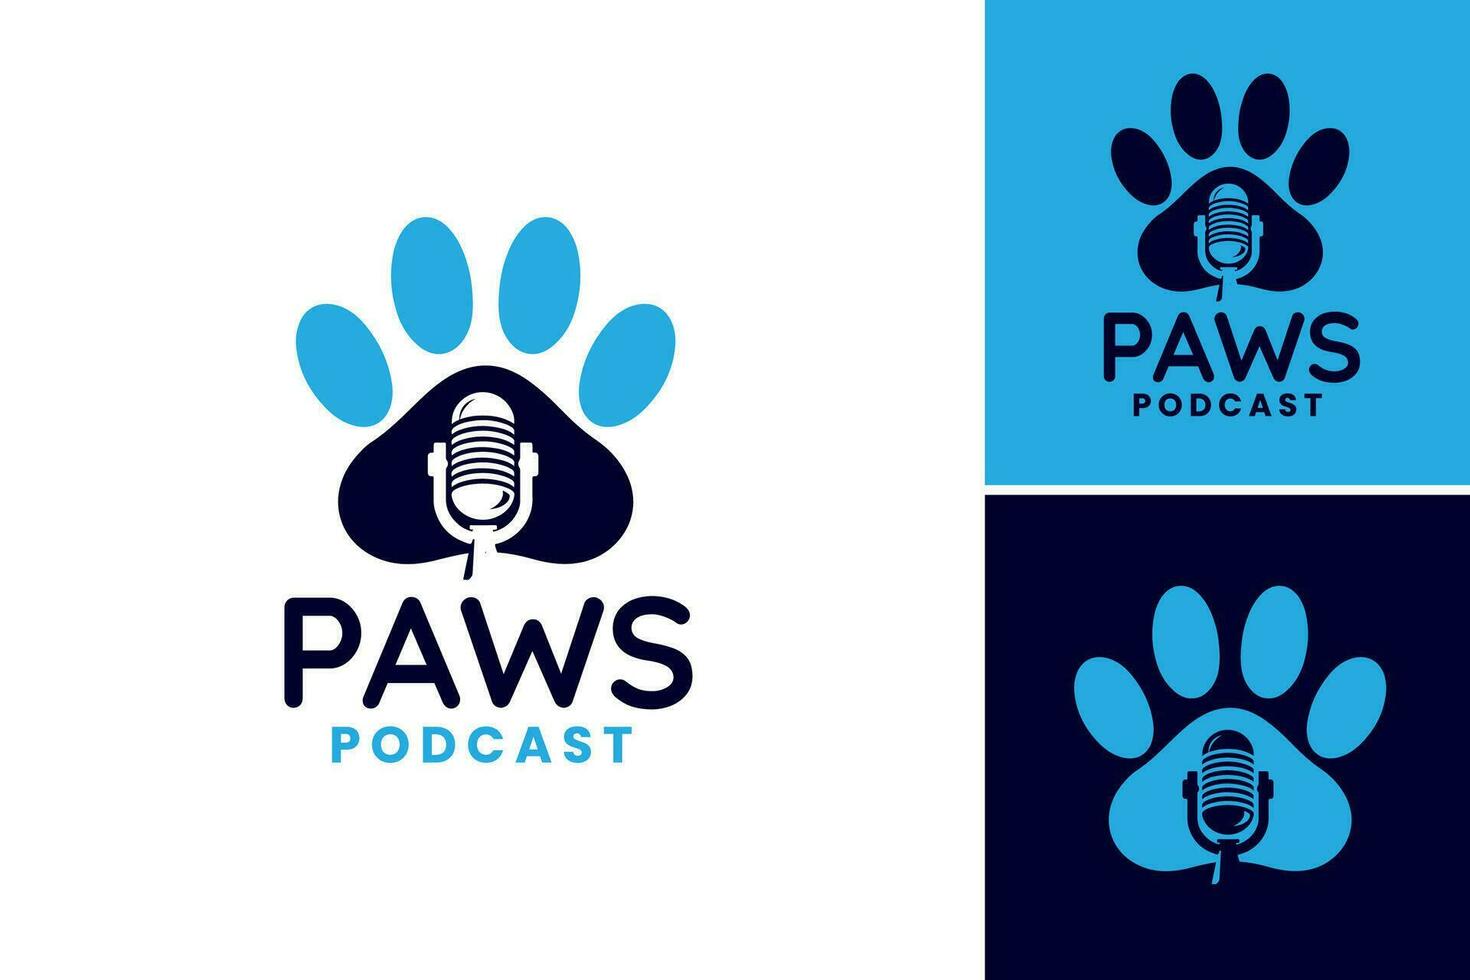 Paws Podcast is a design asset suitable for a podcast or website dedicated to animal lovers vector